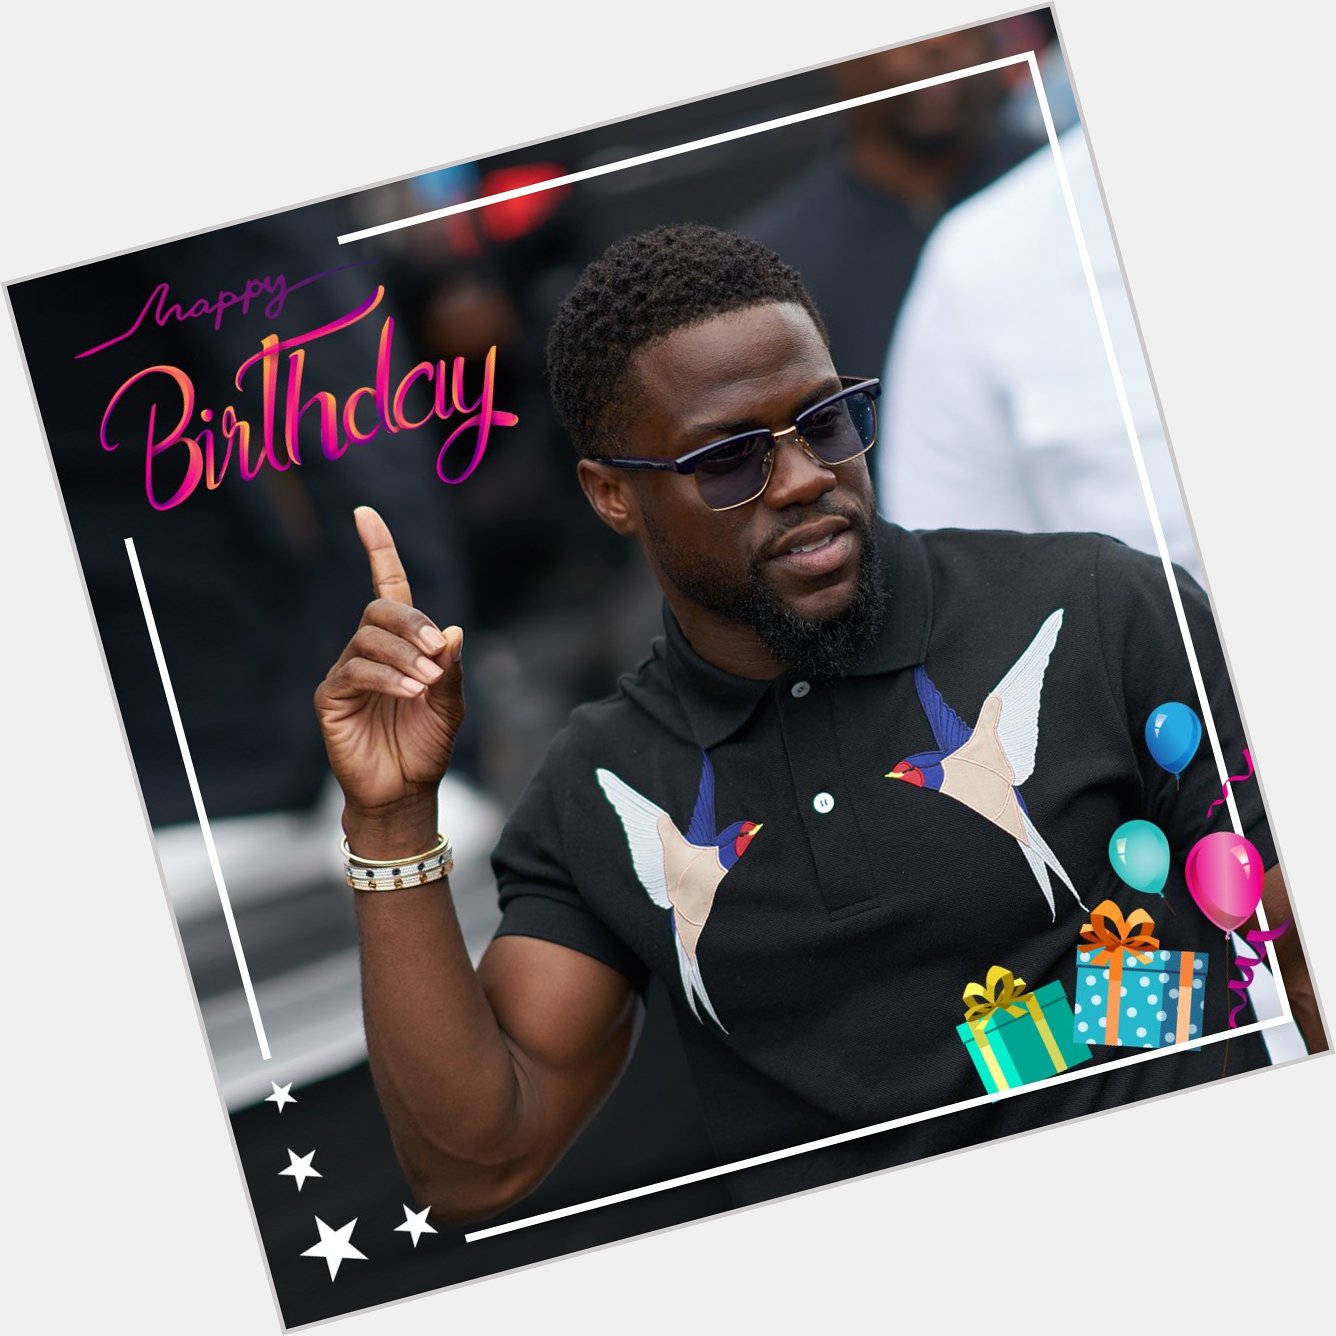 Today we say happy birthday to the ever so funny Kevin Hart
We hope you have a good one Captain Snowball 